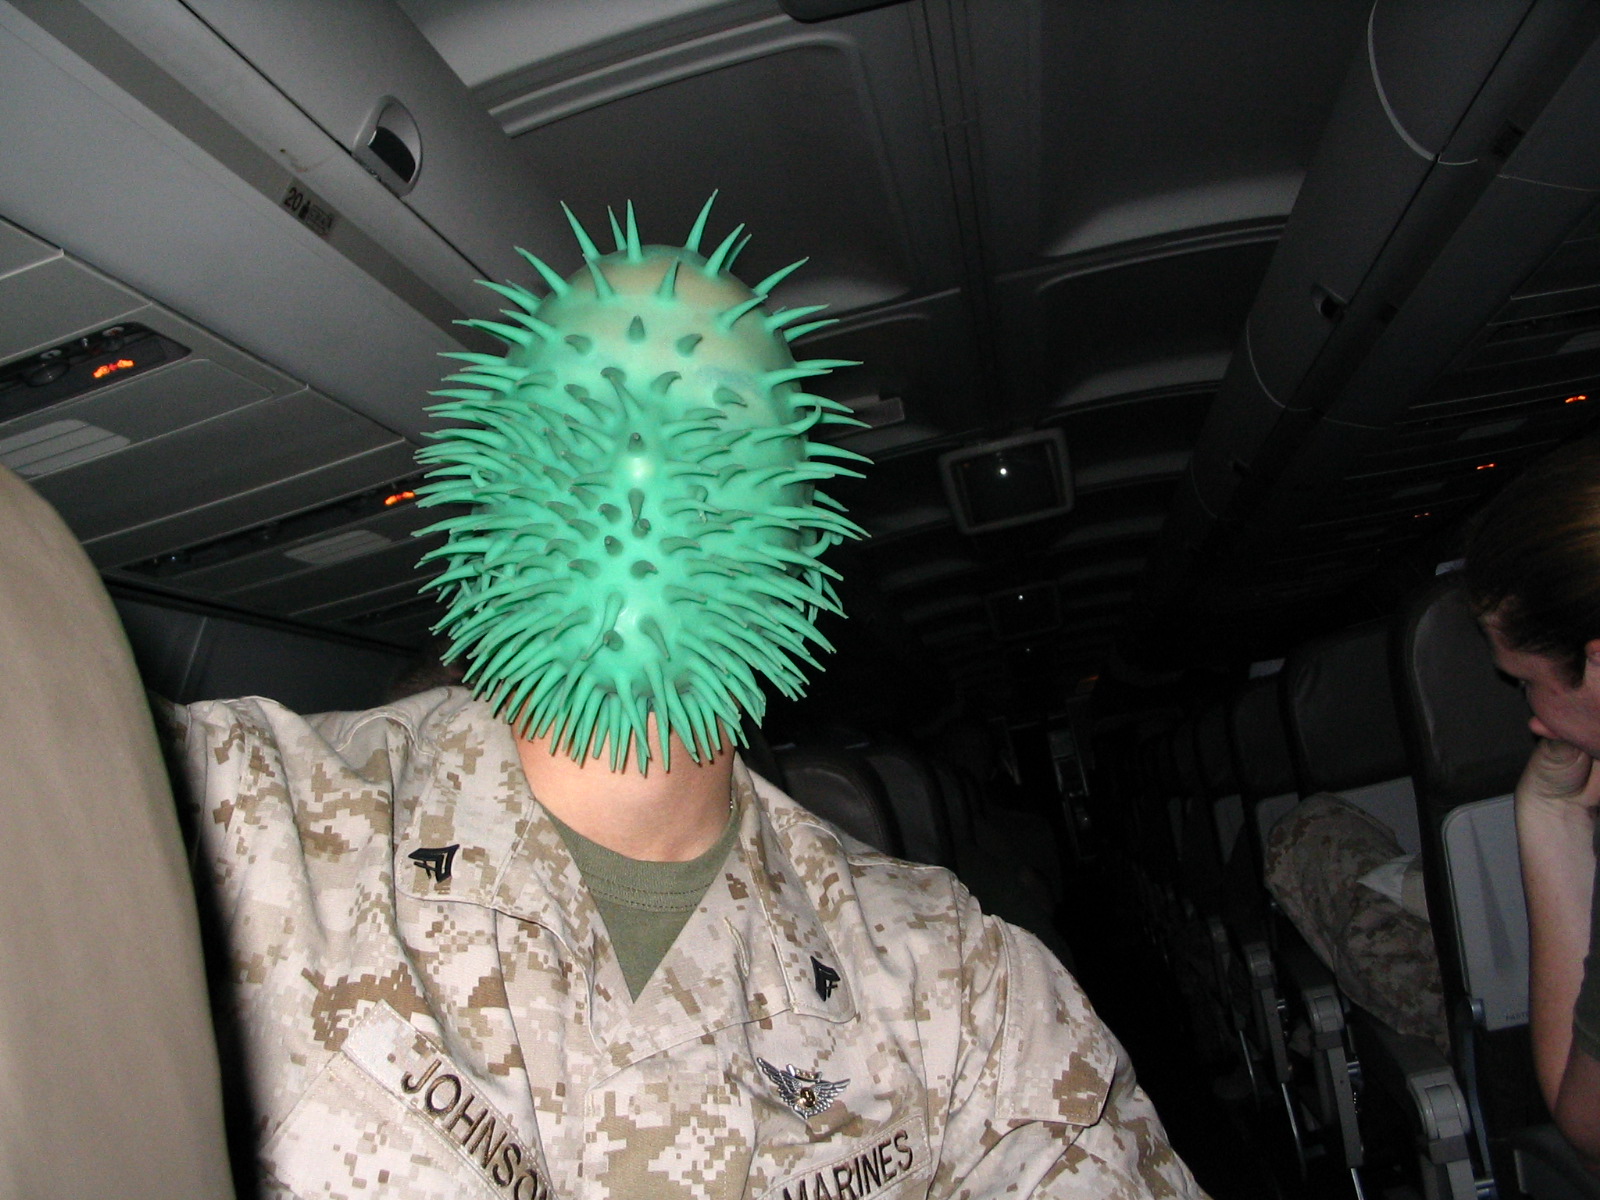 Koosh Ball used as a mask, or an attempted suicide?